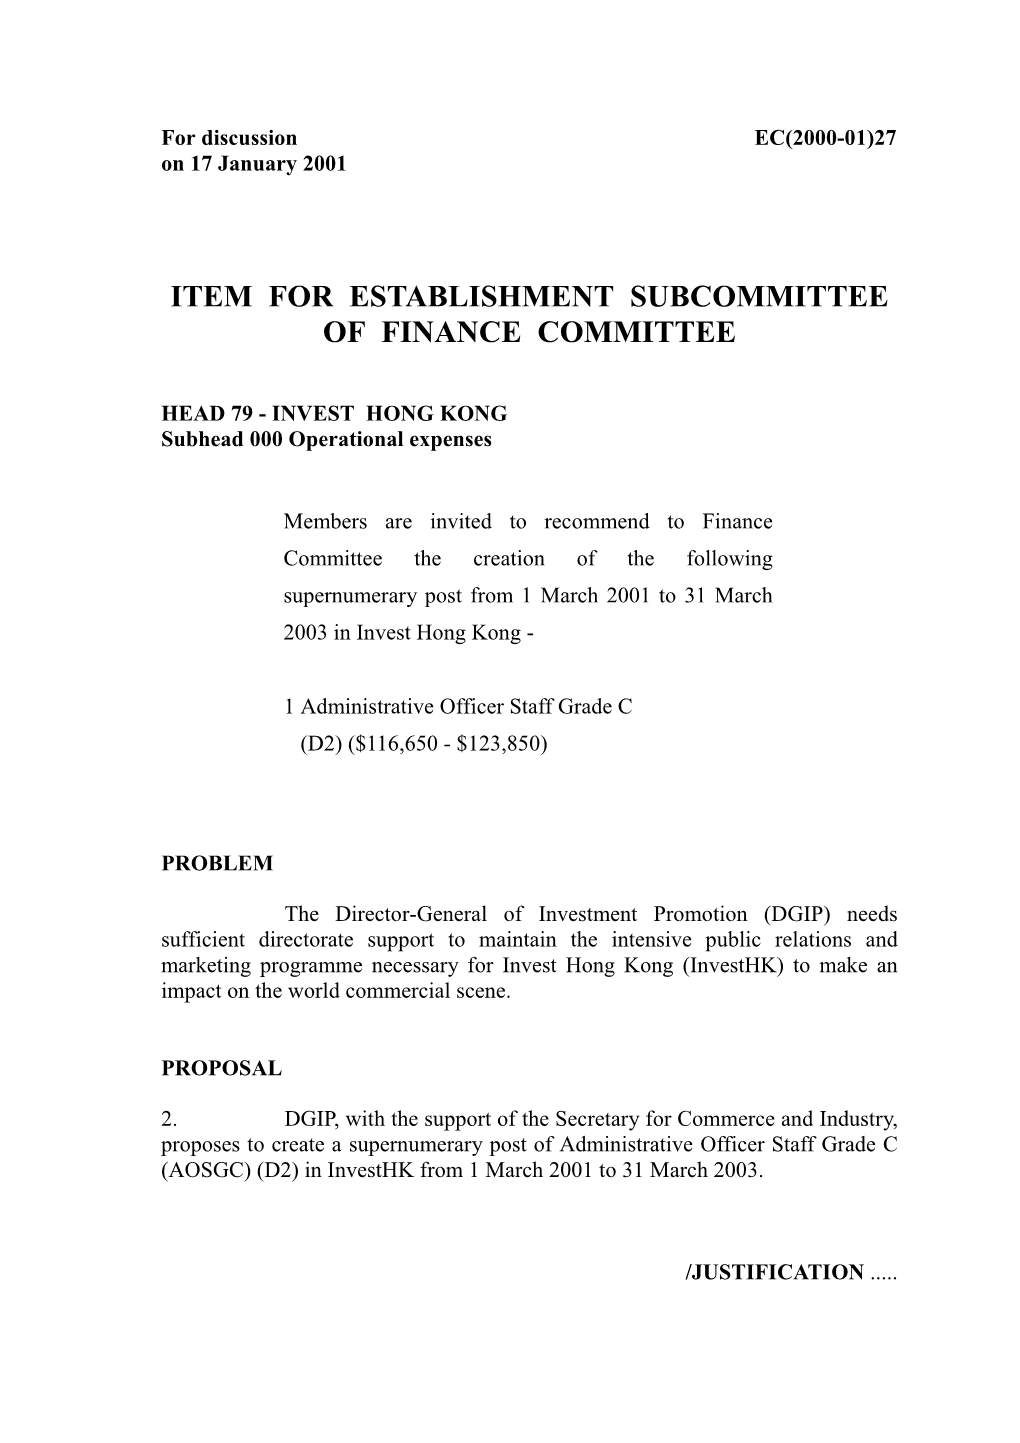 Item for Establishment Subcommittee of Finance Committee